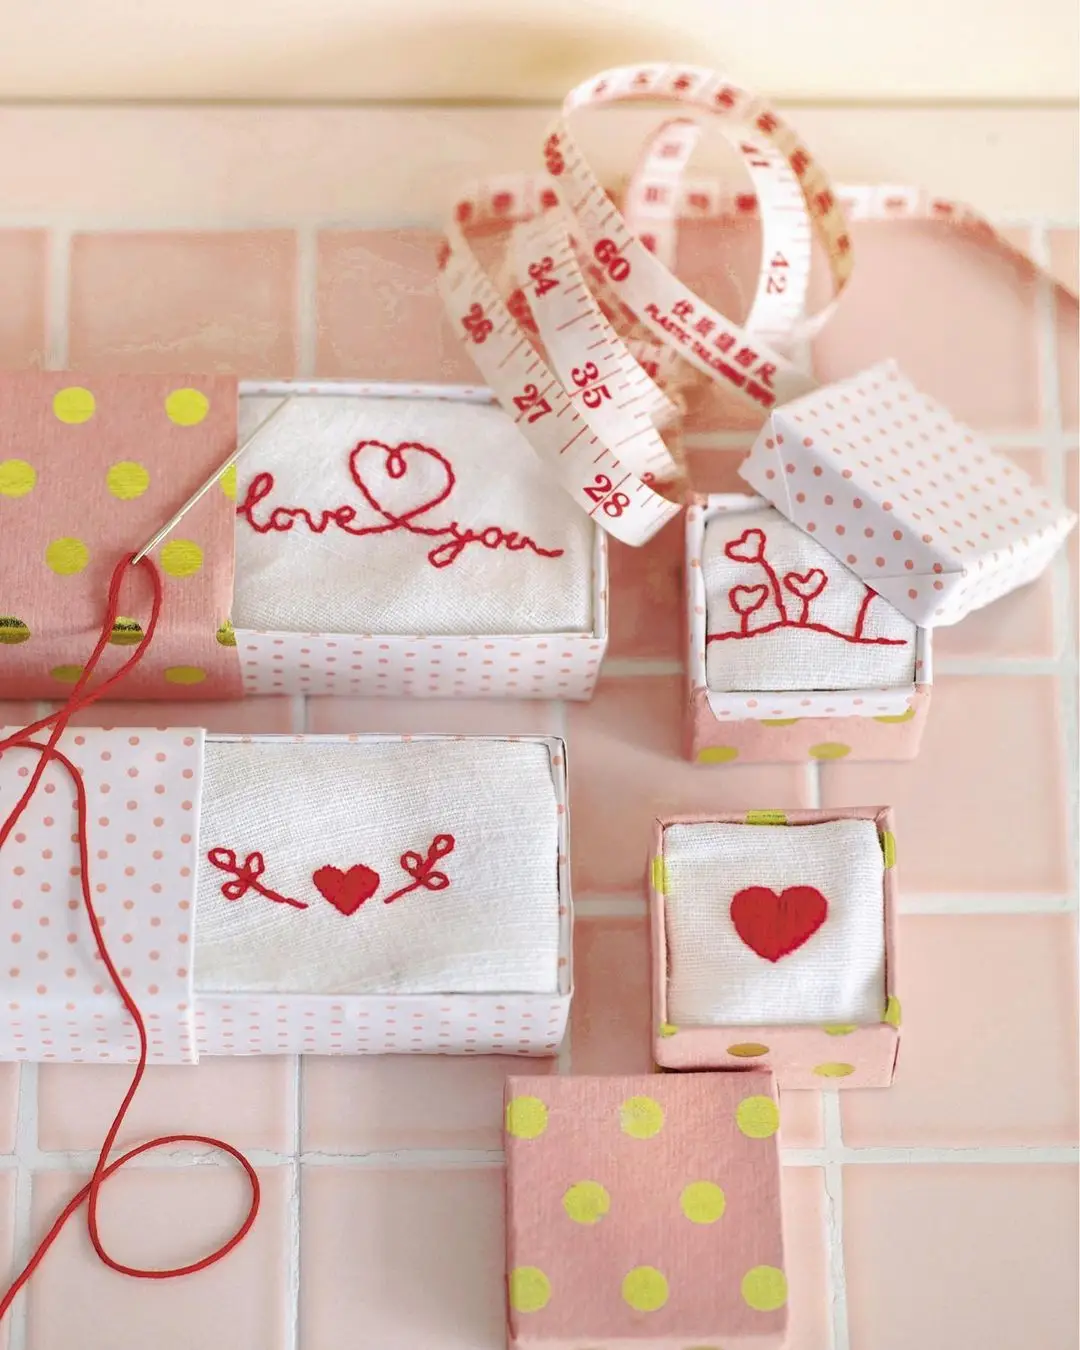 10 Homemade Valentines Day Gift Ideas for Your Other Half ...